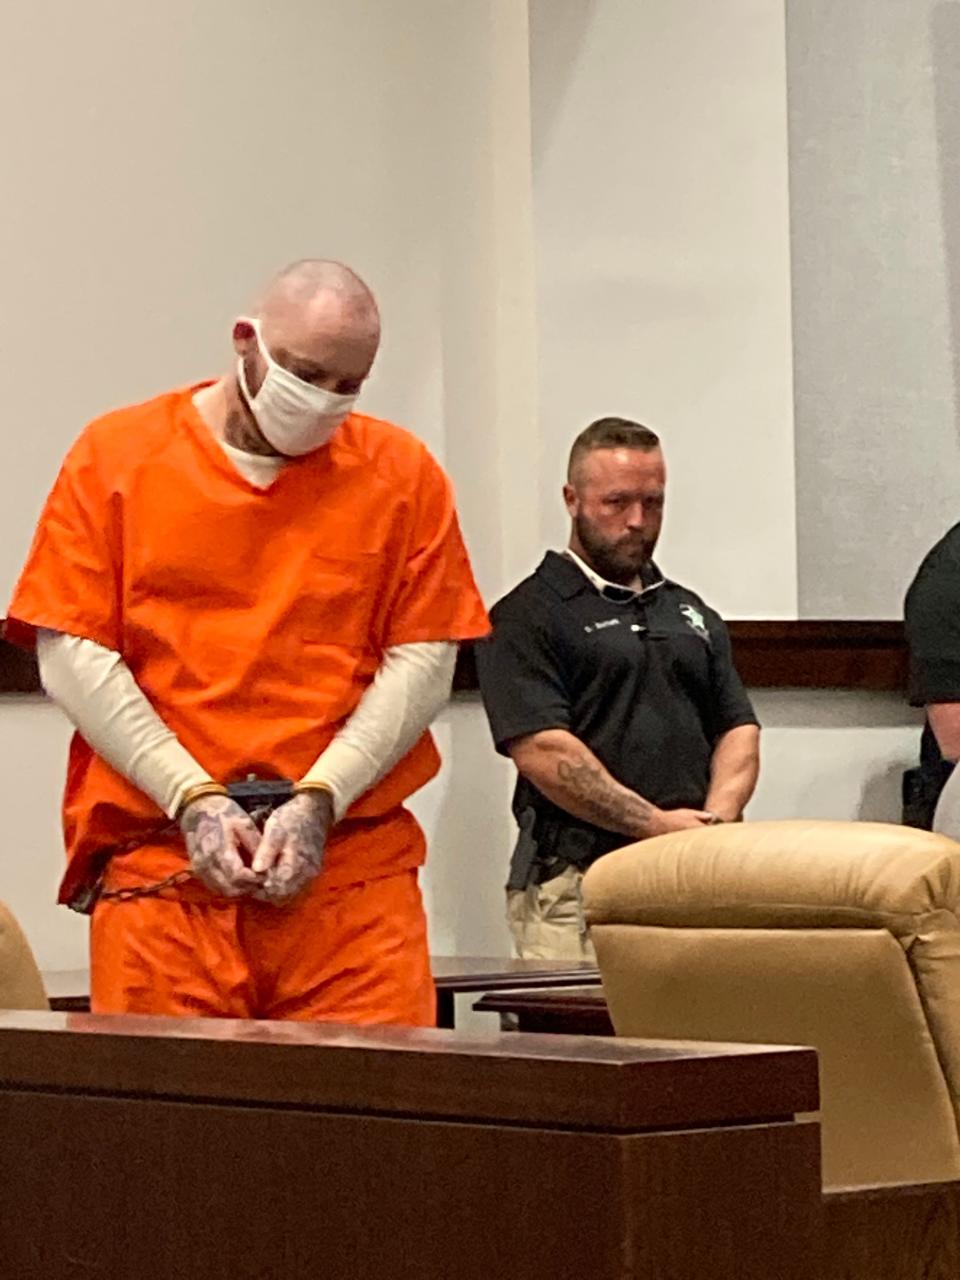 Phillip Lyvonne Stephens, a 38-year-old Panama City resident, will serve nine life sentences after being convicted of sexually assaulting a child multiple times and videotaping the attacks.